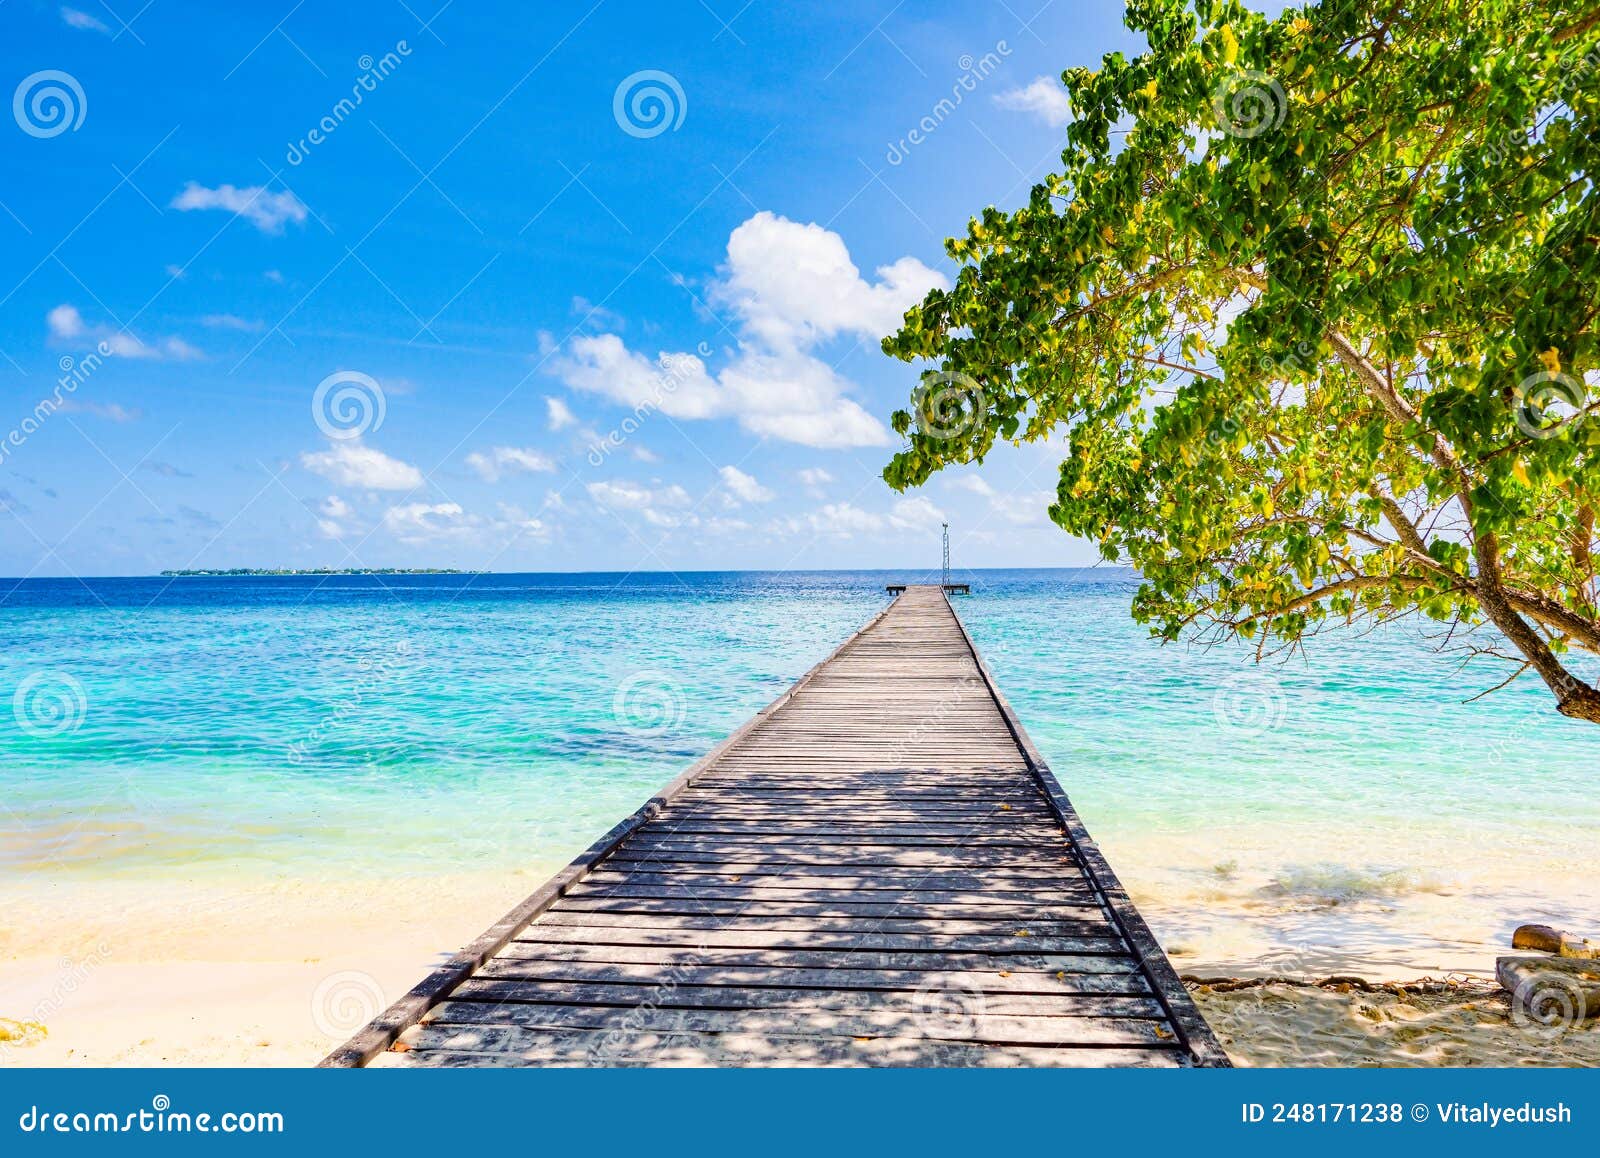 Shoreline and Wooden Jetty Extending into the Indian Ocean. Maldives ...